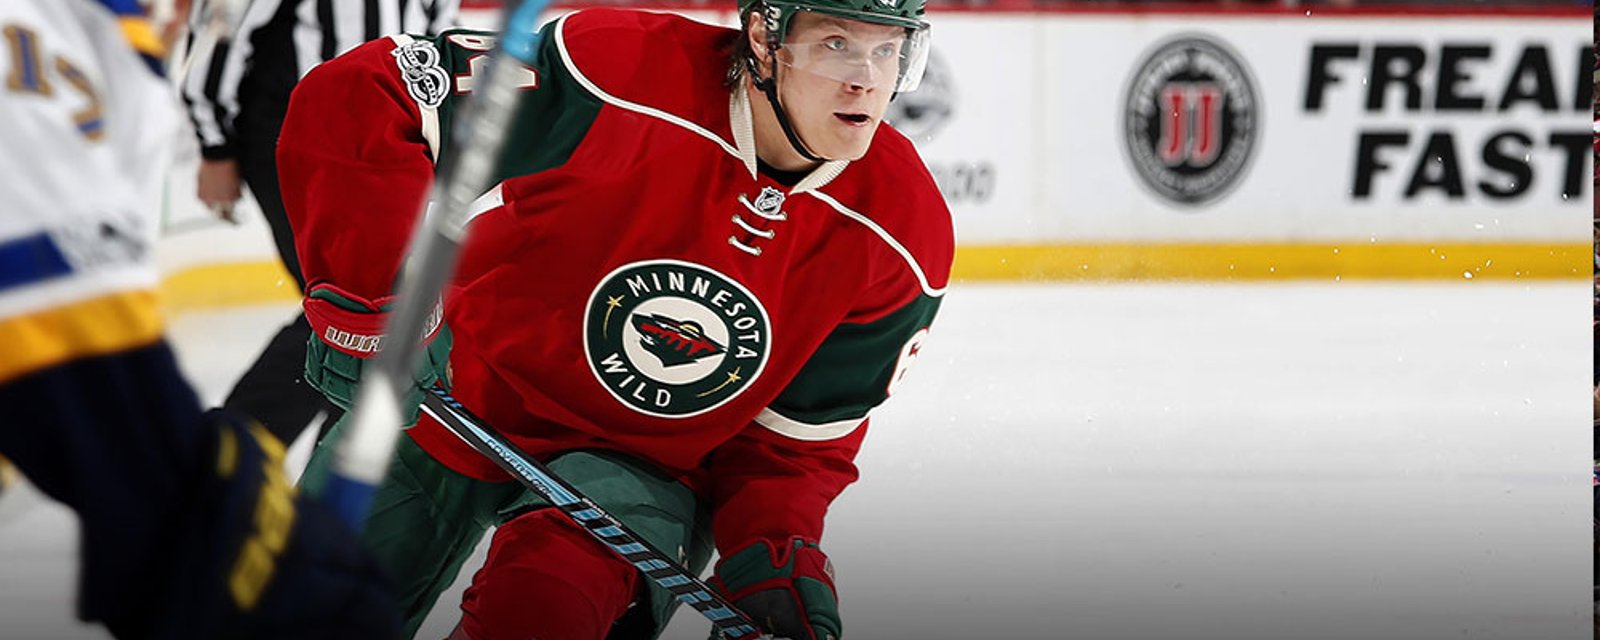 Did Granlund leave money on the table?